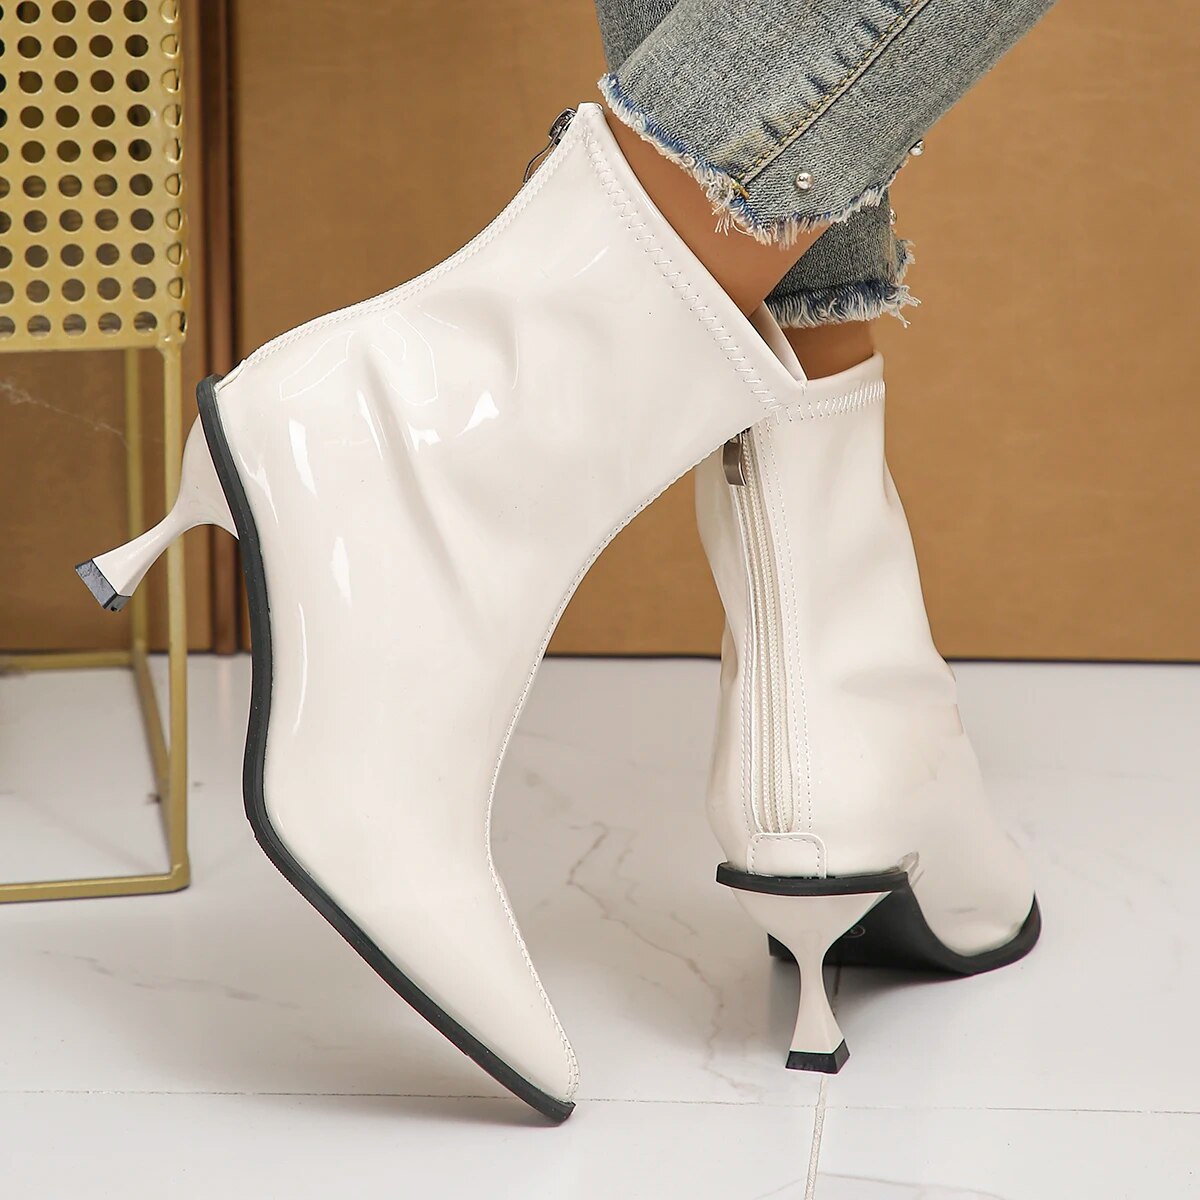 Gominglo -  Sexy Pointed Toe High Heels Patent Leather Ankle Boots GOMINGLO